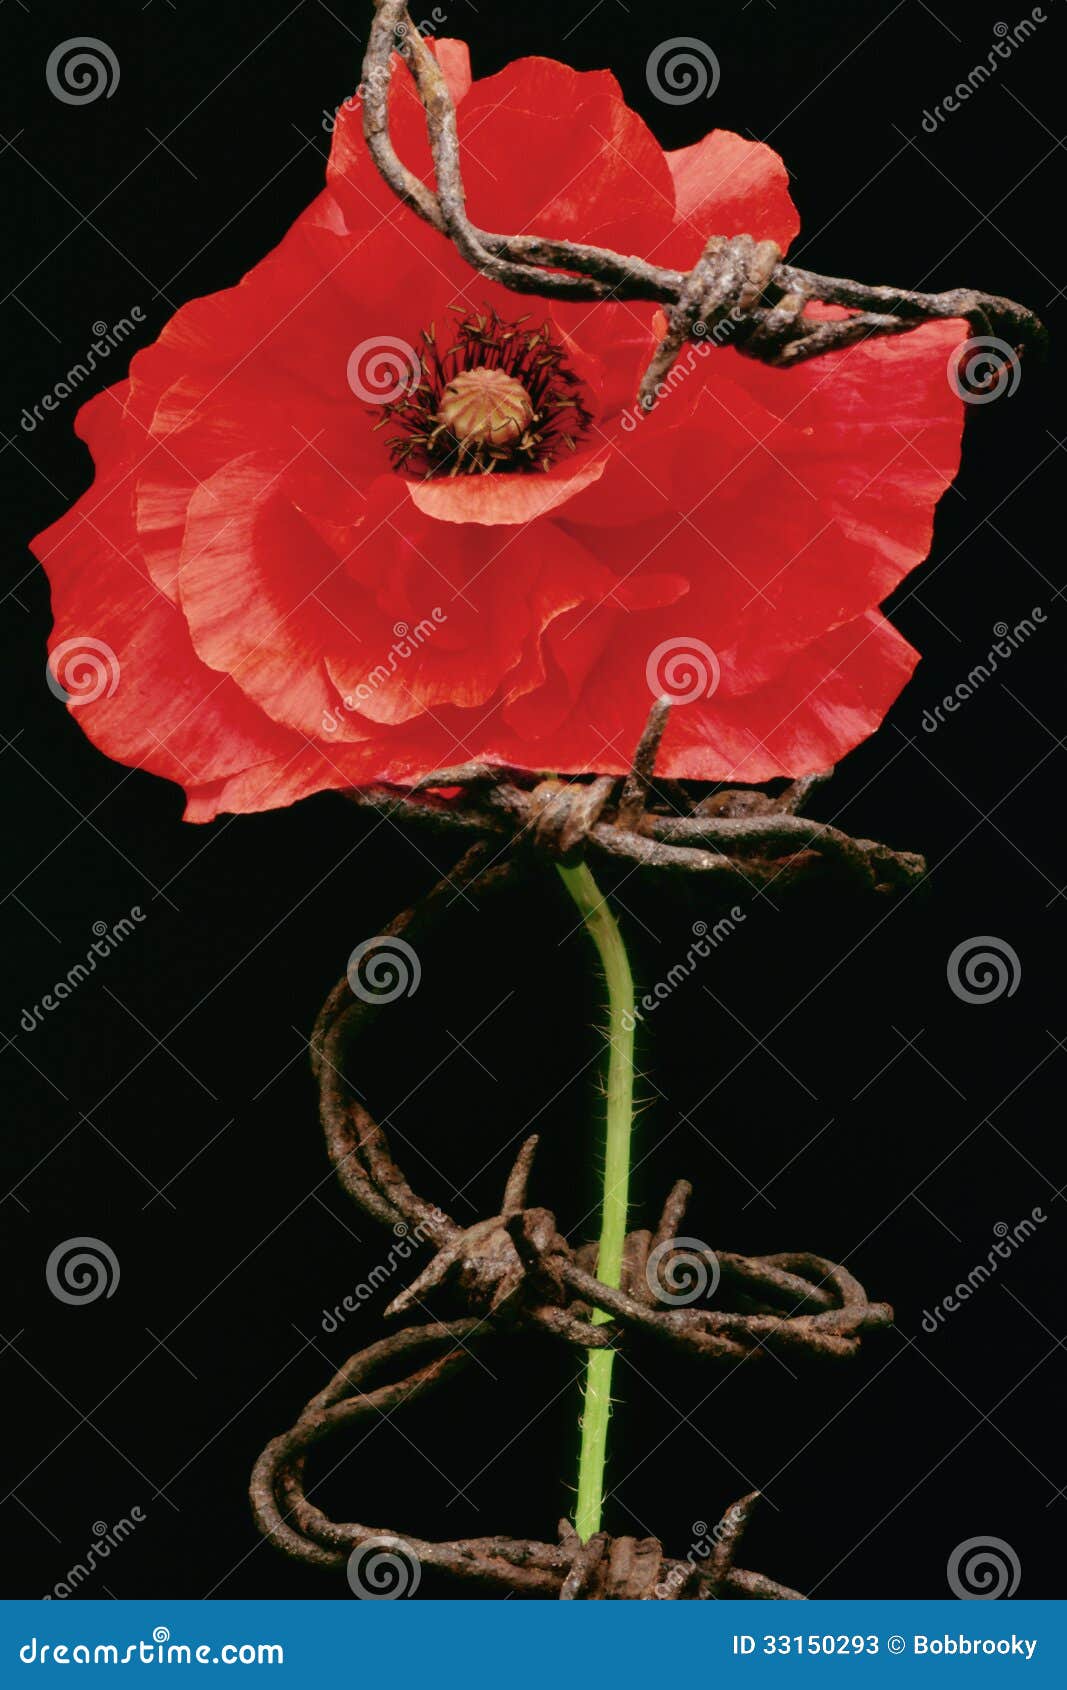 remembrance day, poppy metaphor